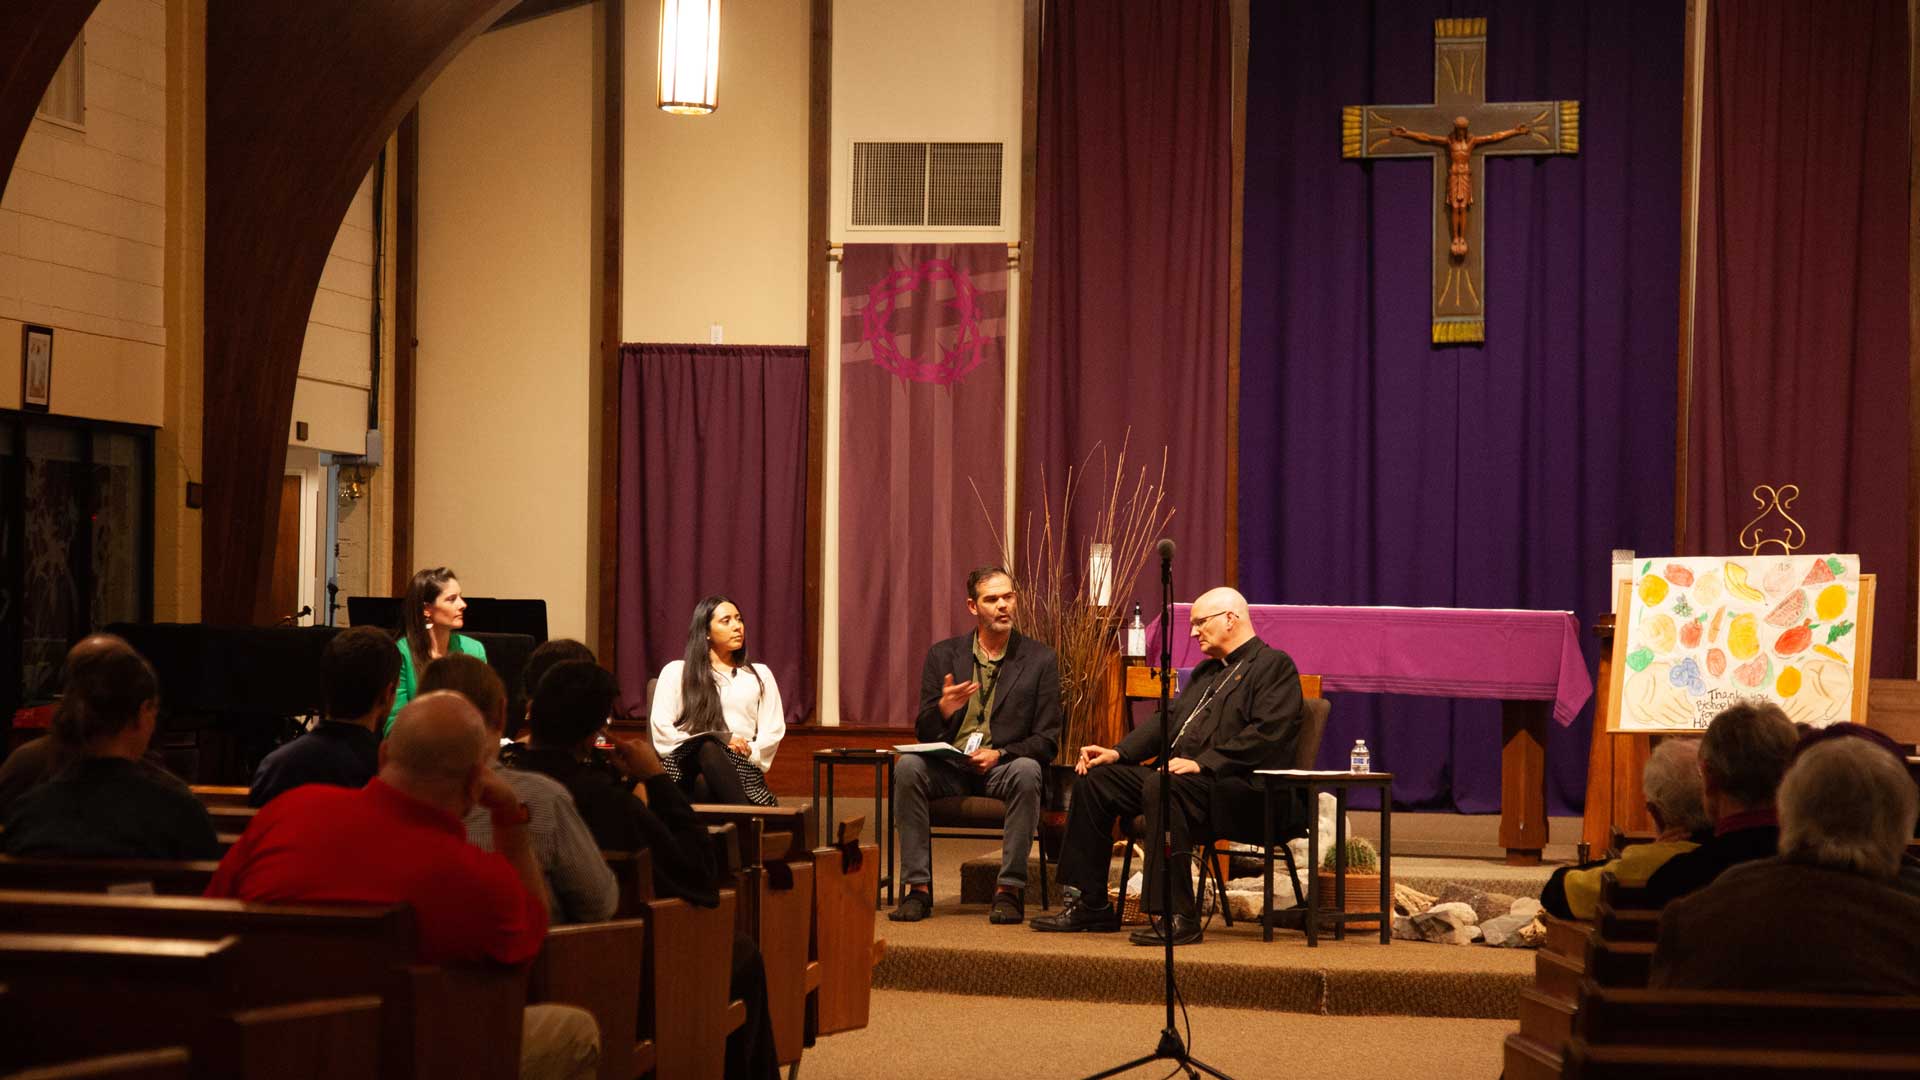 Gabrielle Cardenas, Brian Eller, and Bishop Edward Weisenburger sit on a panel discussion moderated by Ellen Fisher, on Monday, March 18, at the St. Thomas More Newman Center in Tucson, Ariz. Fisher (left) is the assistant director of the Catholic University of America in Tucson.